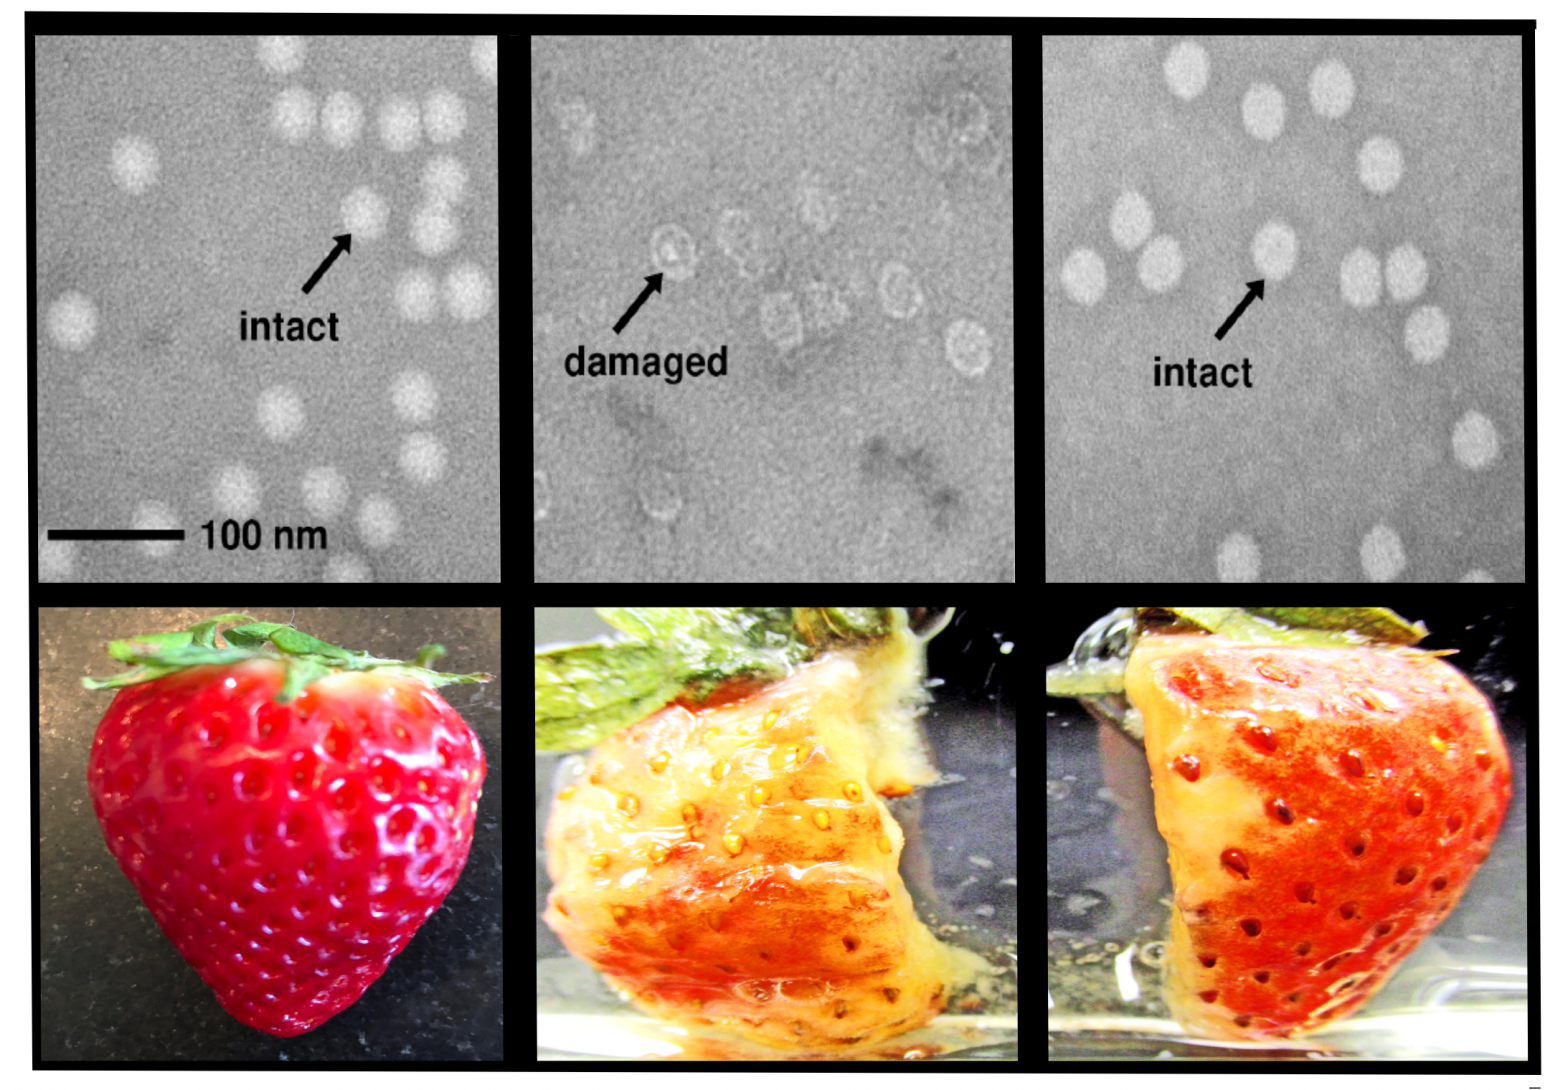 Polioviruses and a strawberry were mixed with a synthetic D. radiodurans manganese-decapeptide antioxidant before exposure to a sterilizing dose of gamma rays. The treated viruses and treated strawberry (right column) remained noticeably preserved compared to the untreated specimens (middle). (Image: Dr. Michael J. Daly (Uniformed Services University)